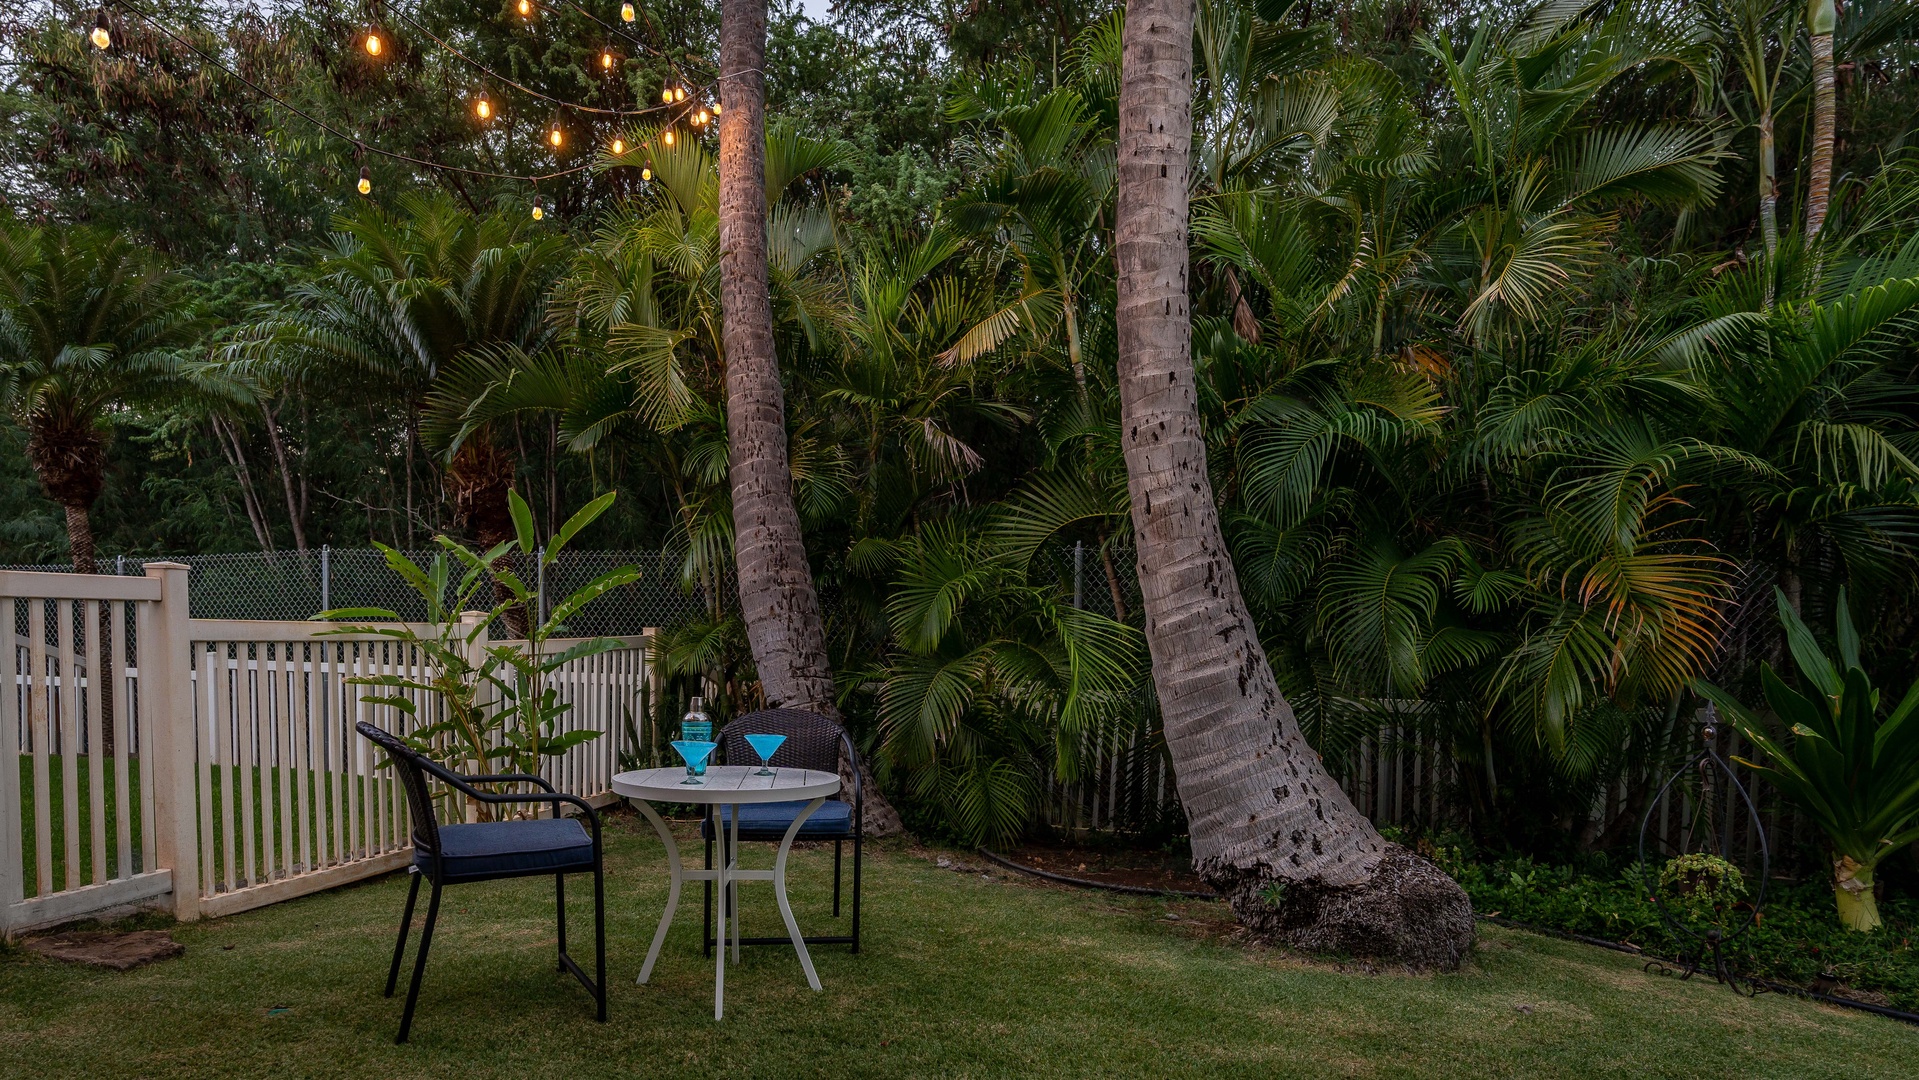 Kapolei Vacation Rentals, Fairways at Ko Olina 4A - The tranquil backyard where you can dine al fresco under swaying palm trees.